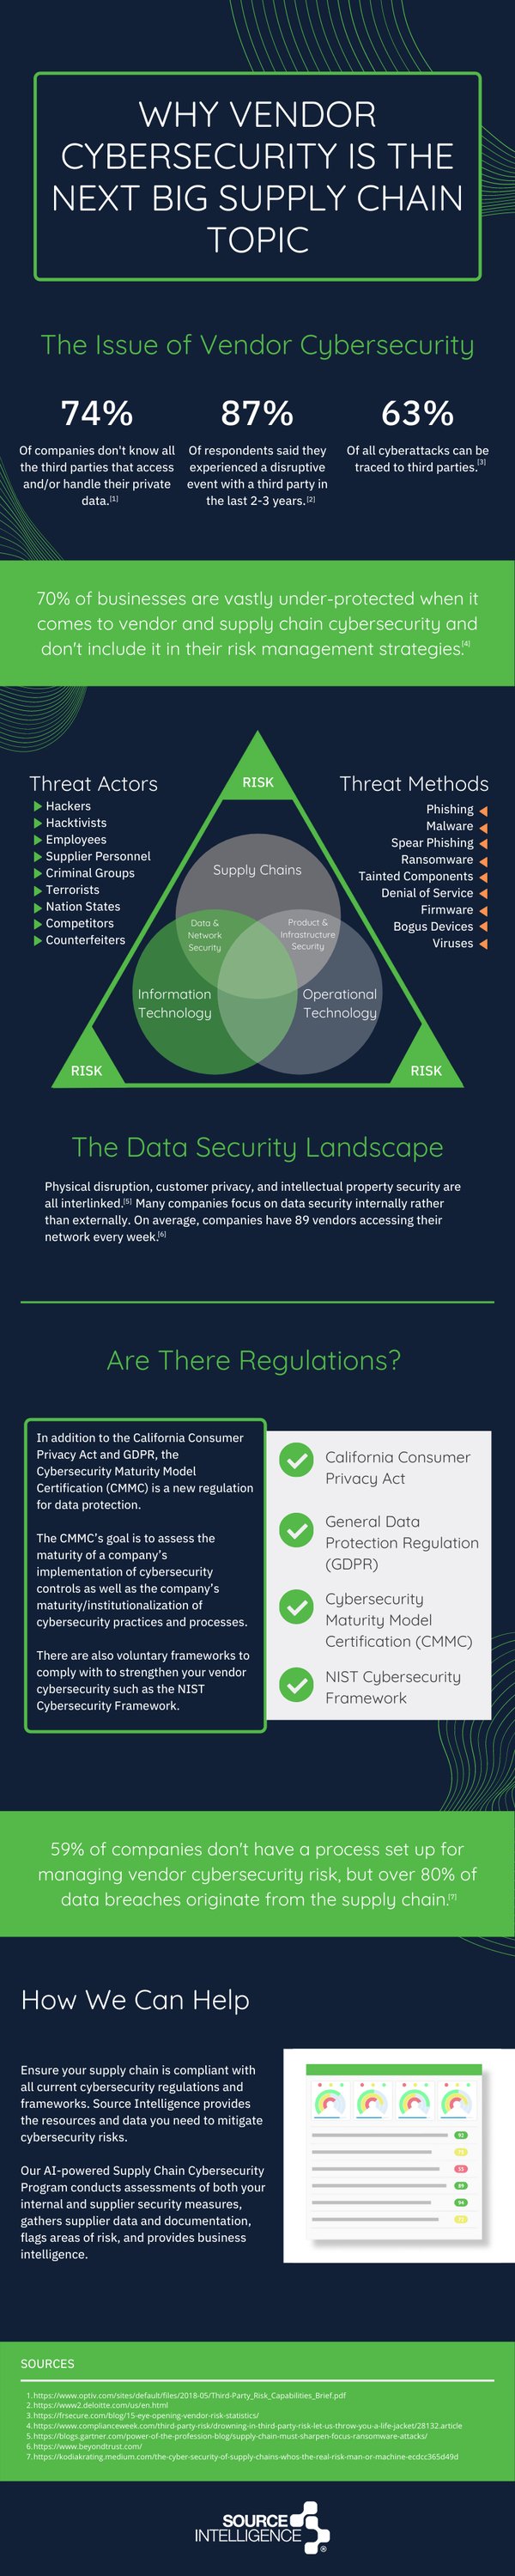 Vendor Cybersecurity is the next big Supply Chain topic Infographic